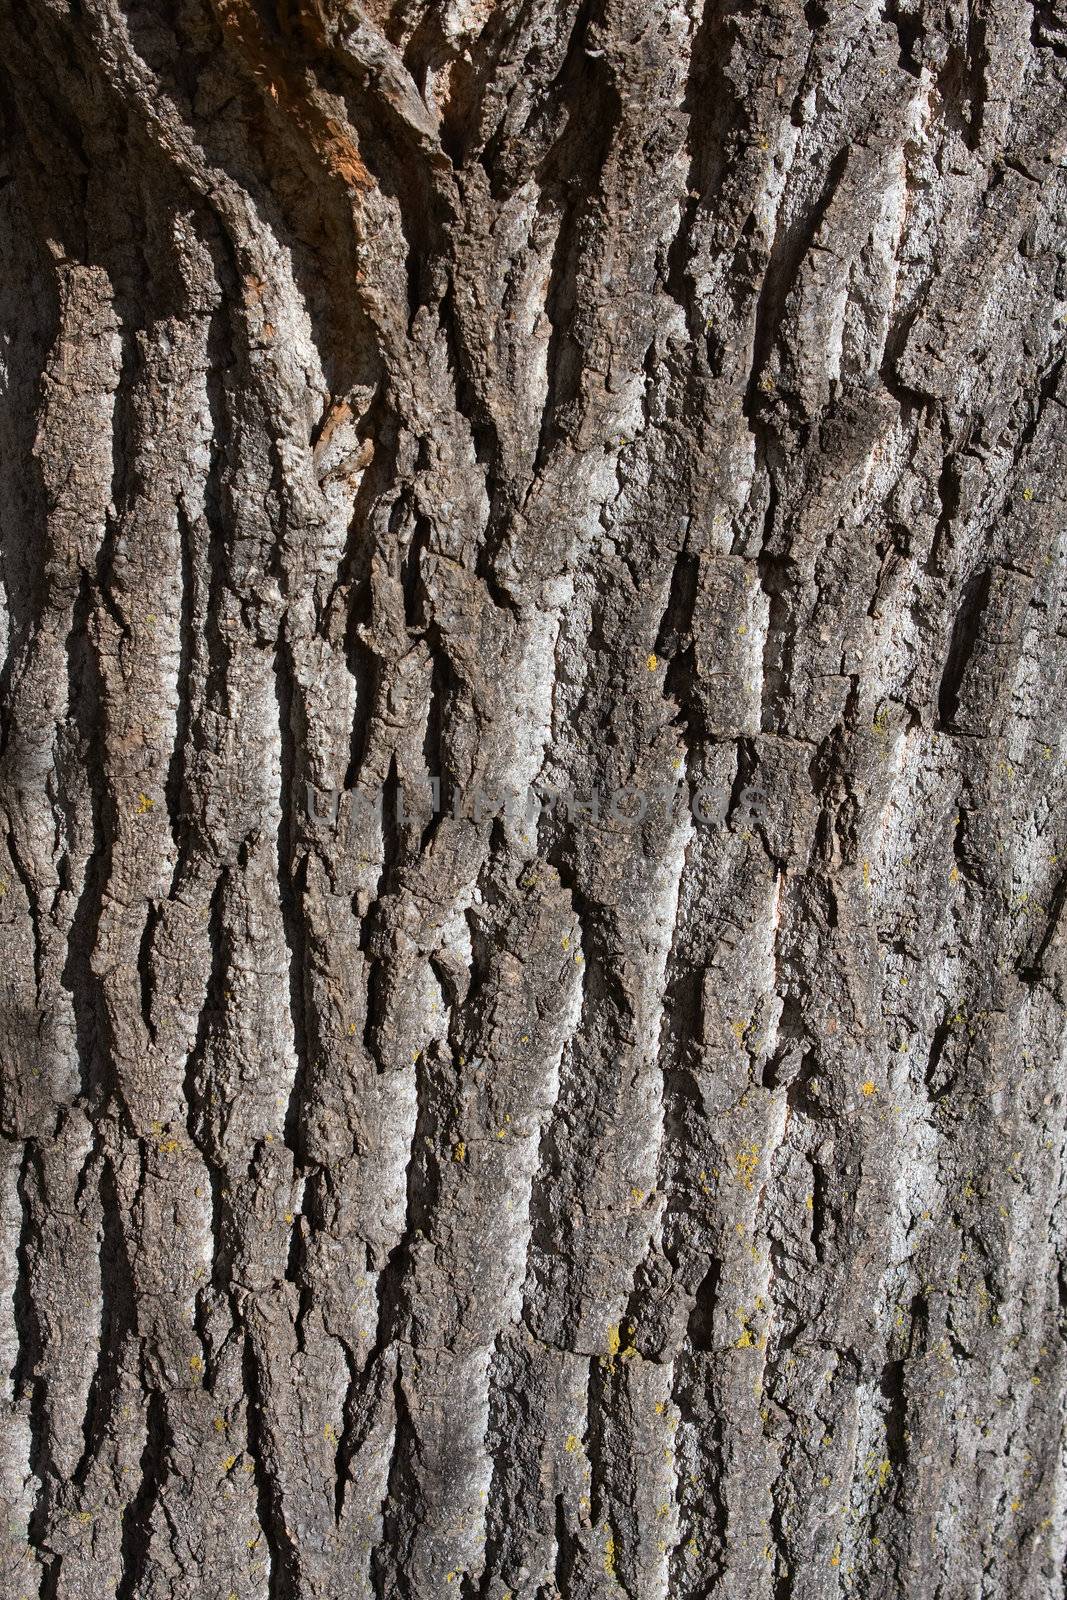 Background of bark on an old tree.
